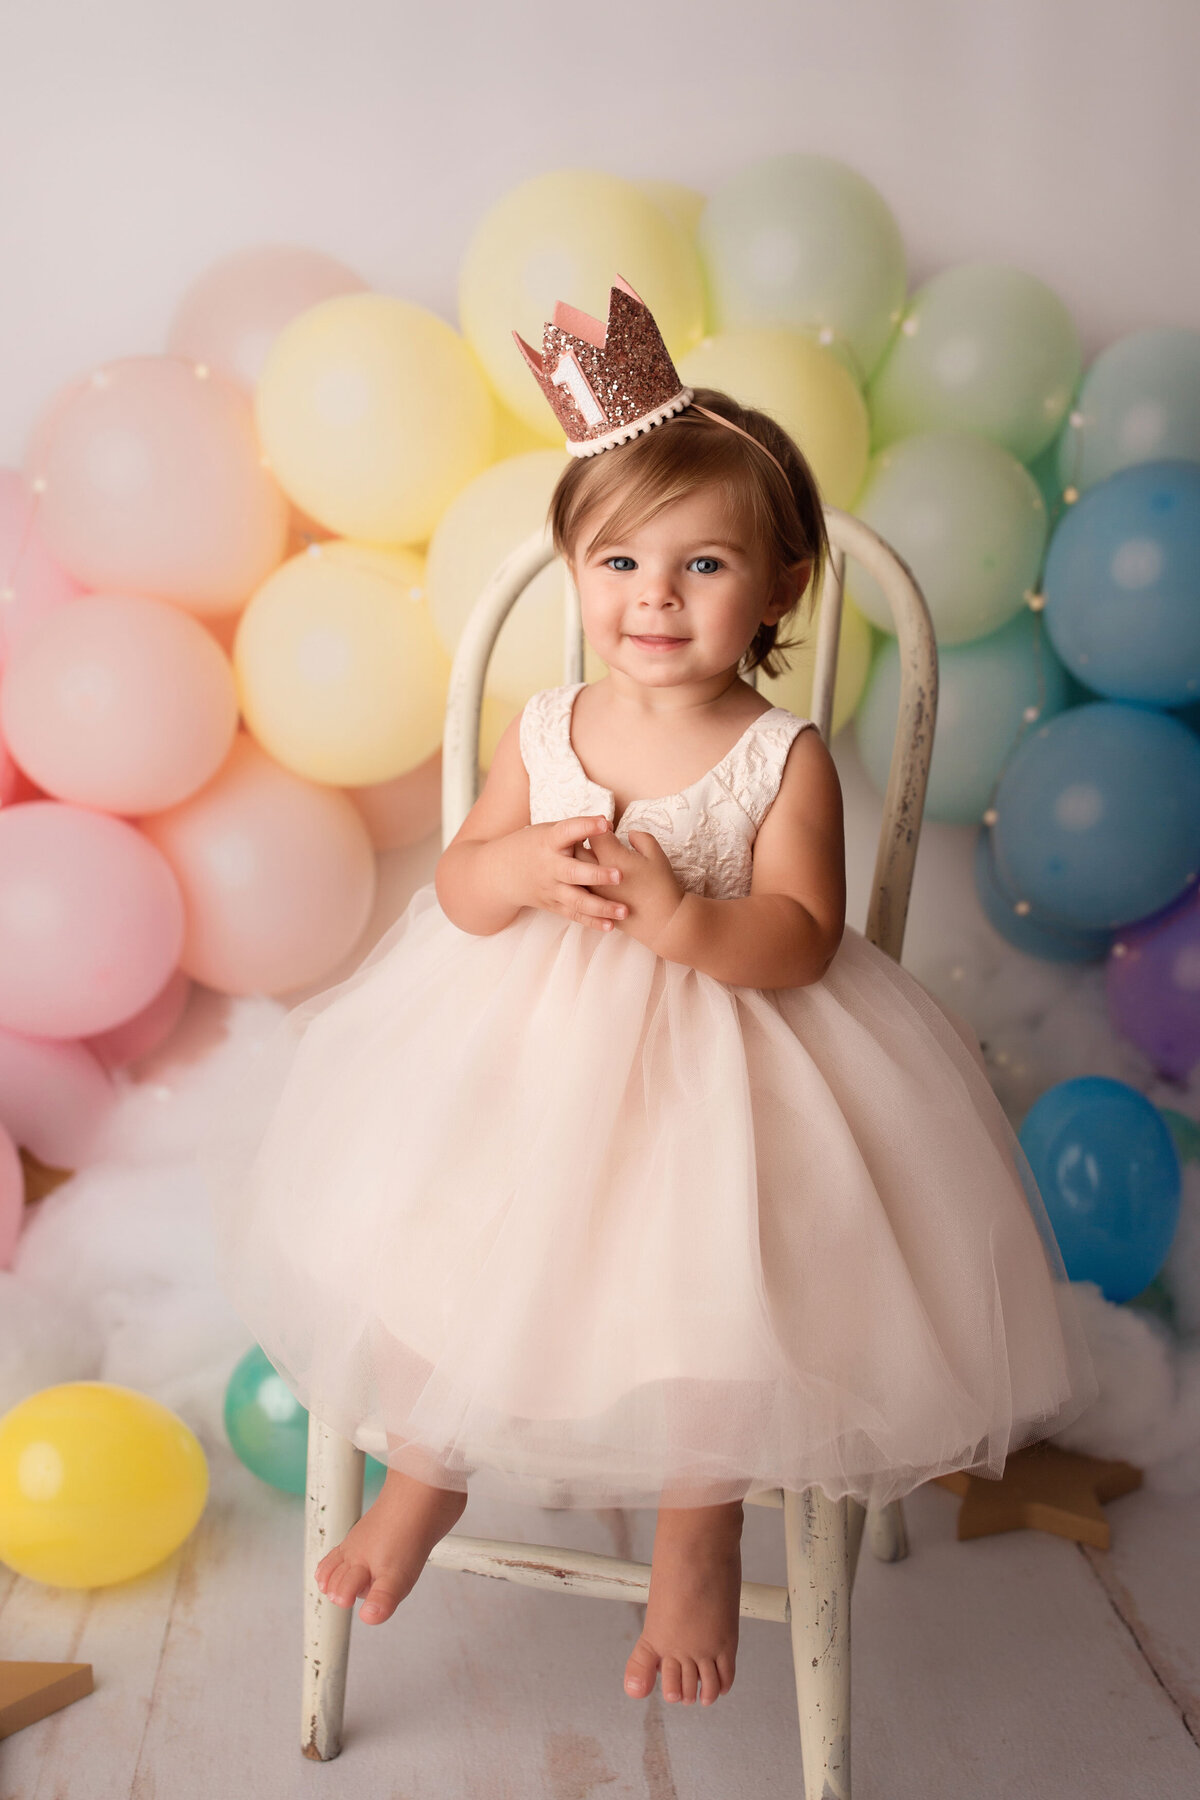 birthday girl wearing a pink dress with rainbow balloons behind her